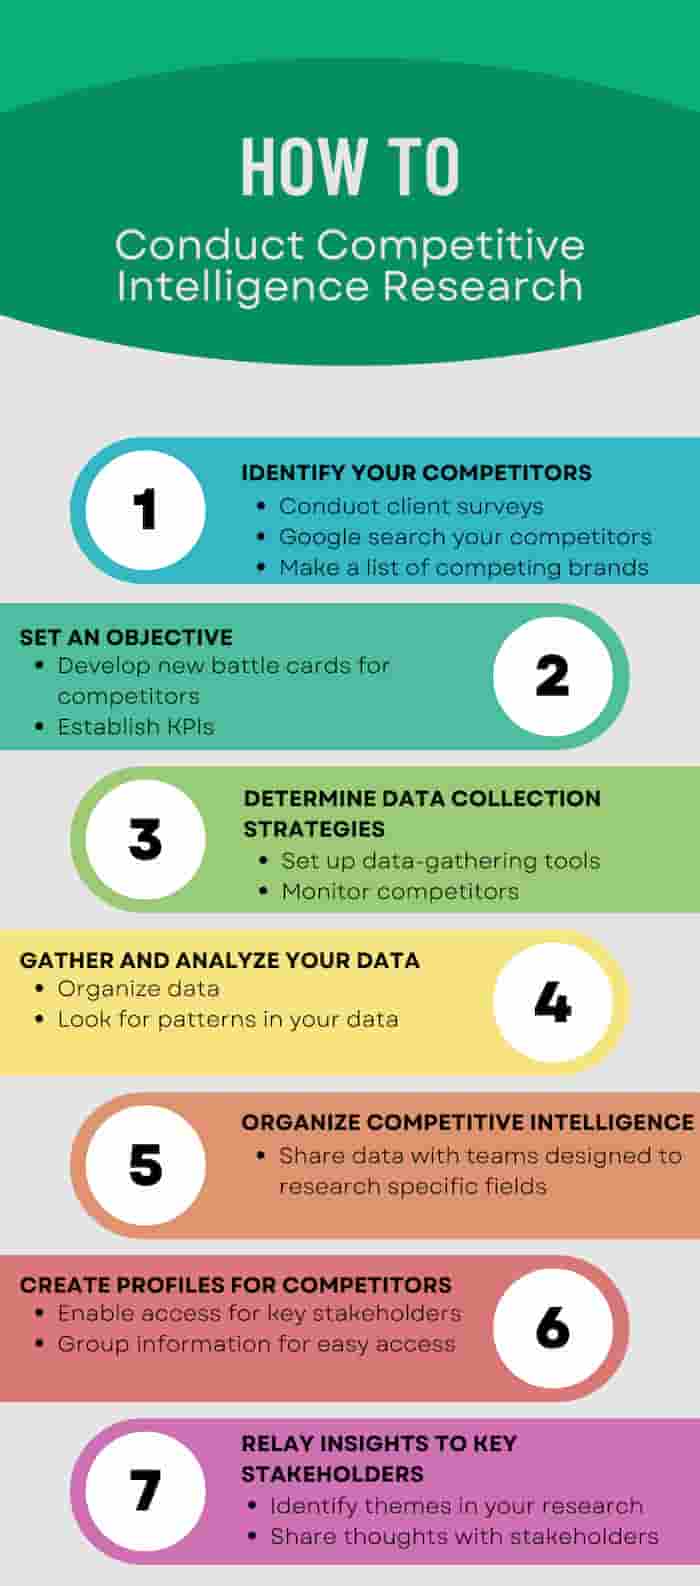 How to Conduct Competitive Intelligence Research